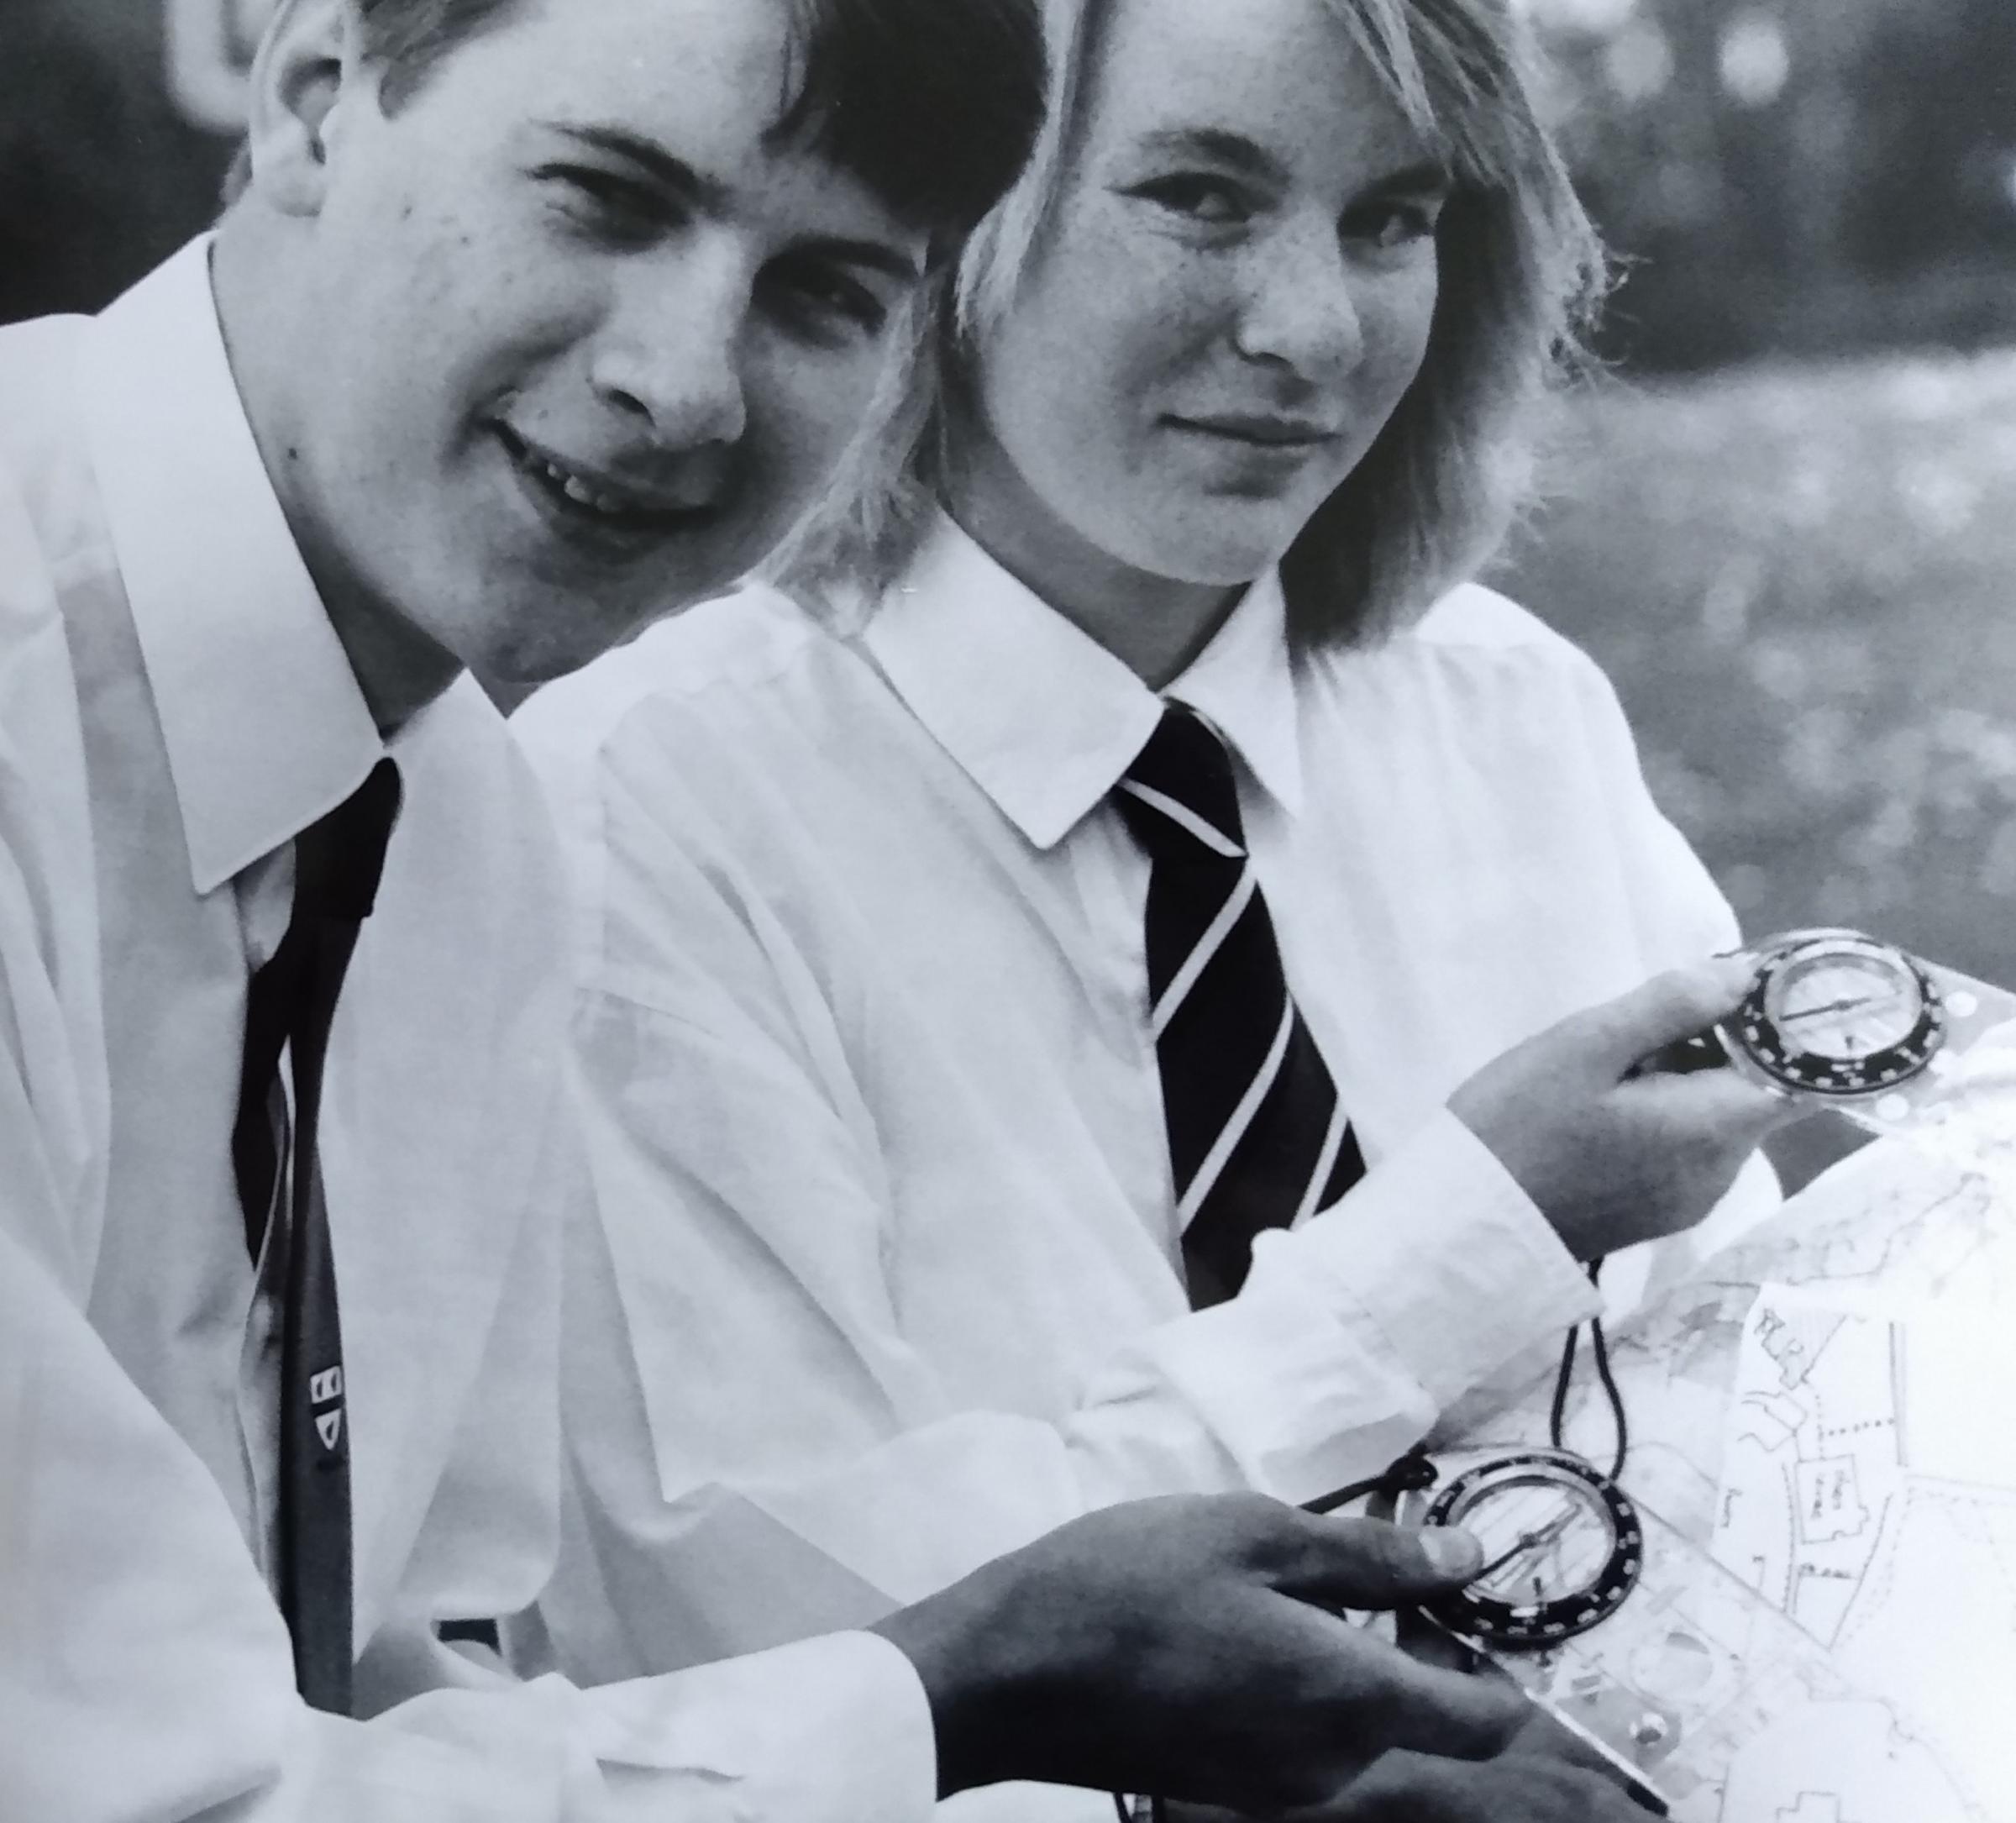 June 1989 and Carlton Jefferies and Johanna Eaves were some of the students who devised orienteering courses for local primary schools, earning Nunnery Wood £125 for their work 